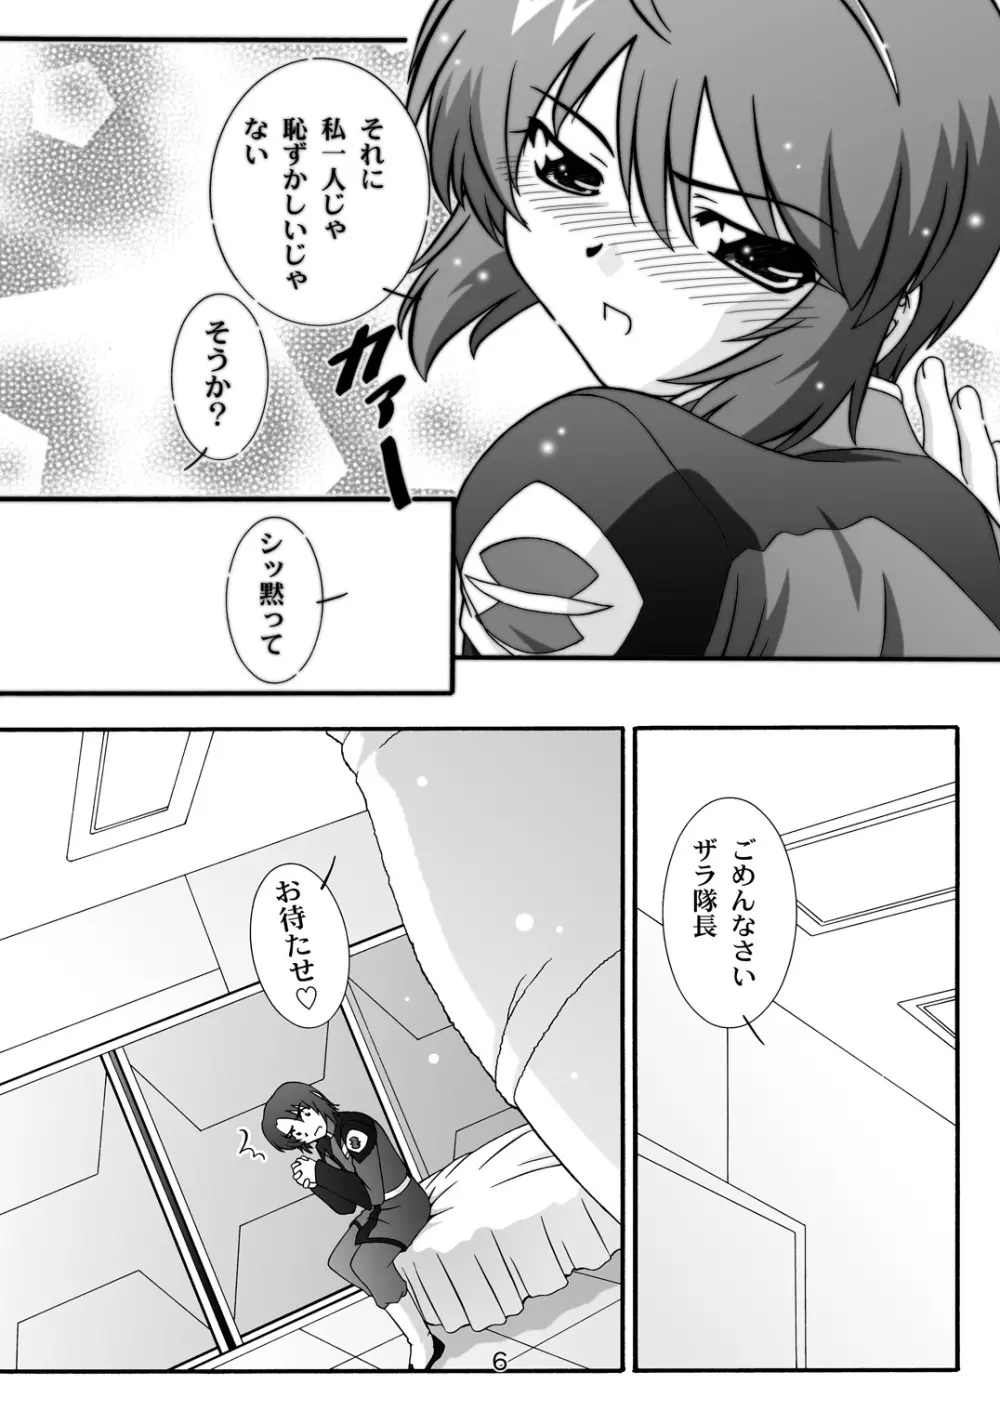 STAGE.1 ルナマリアの歌声 - page6